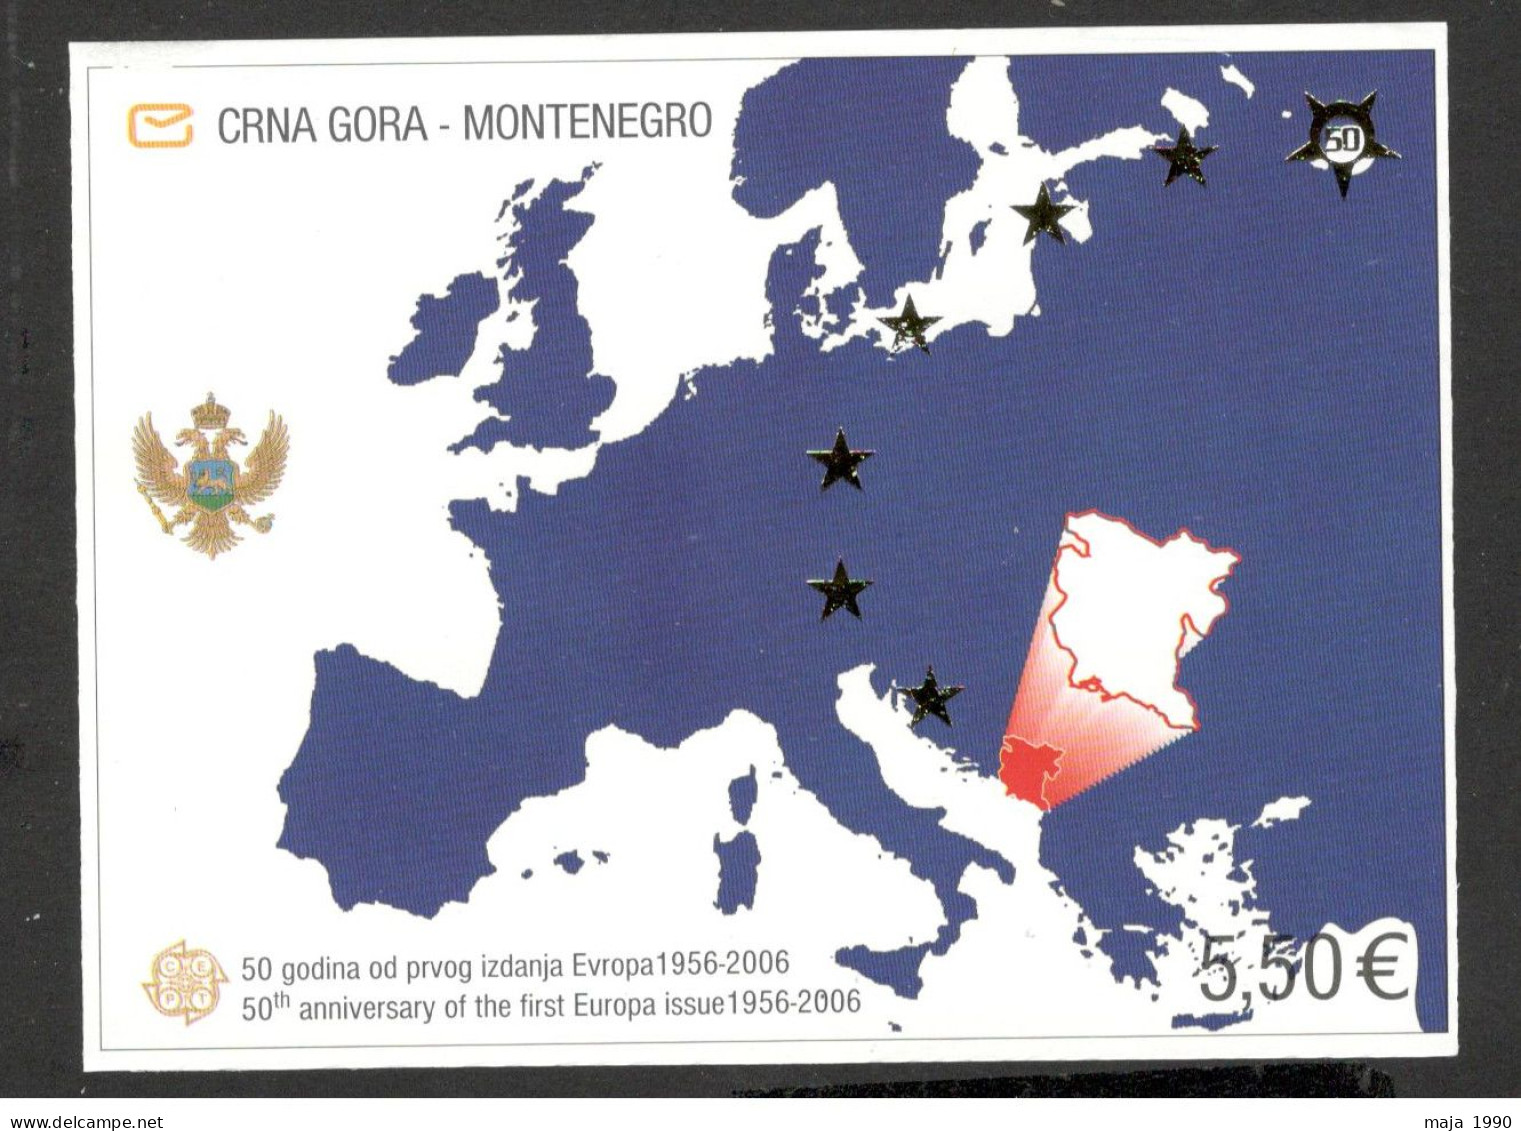 MONTENEGRO - MNH IMPERFORATED BLOCK - 50 YEARS OF EUROPA CEPT - MAP - 2006. - Montenegro